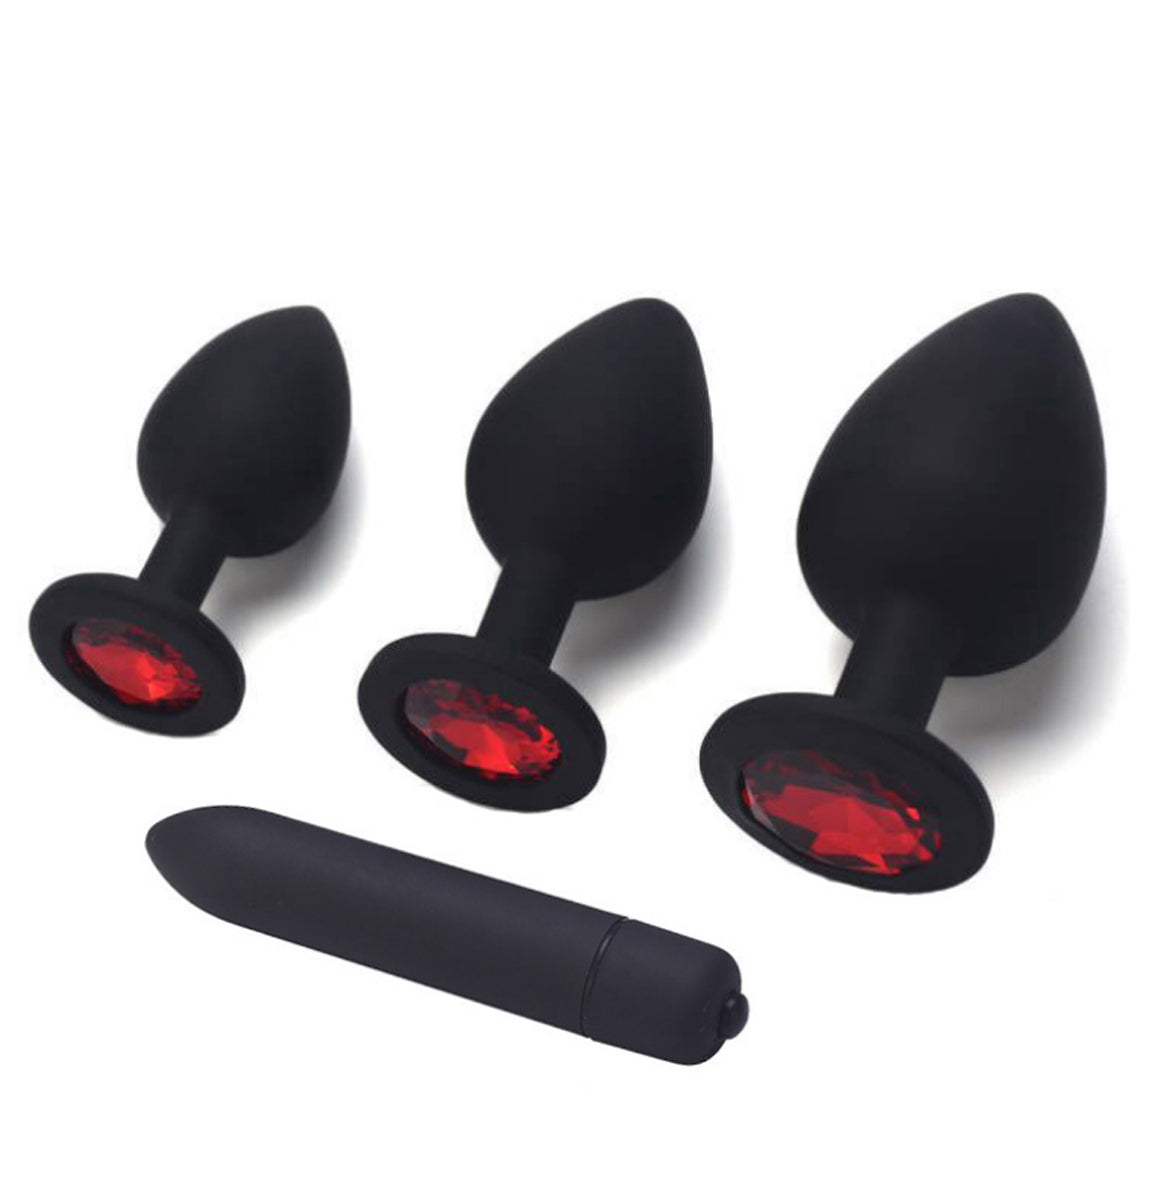 TPFSecret Juwel anal plug set of 4 with vibrator - with red gemstone - silicone black or red